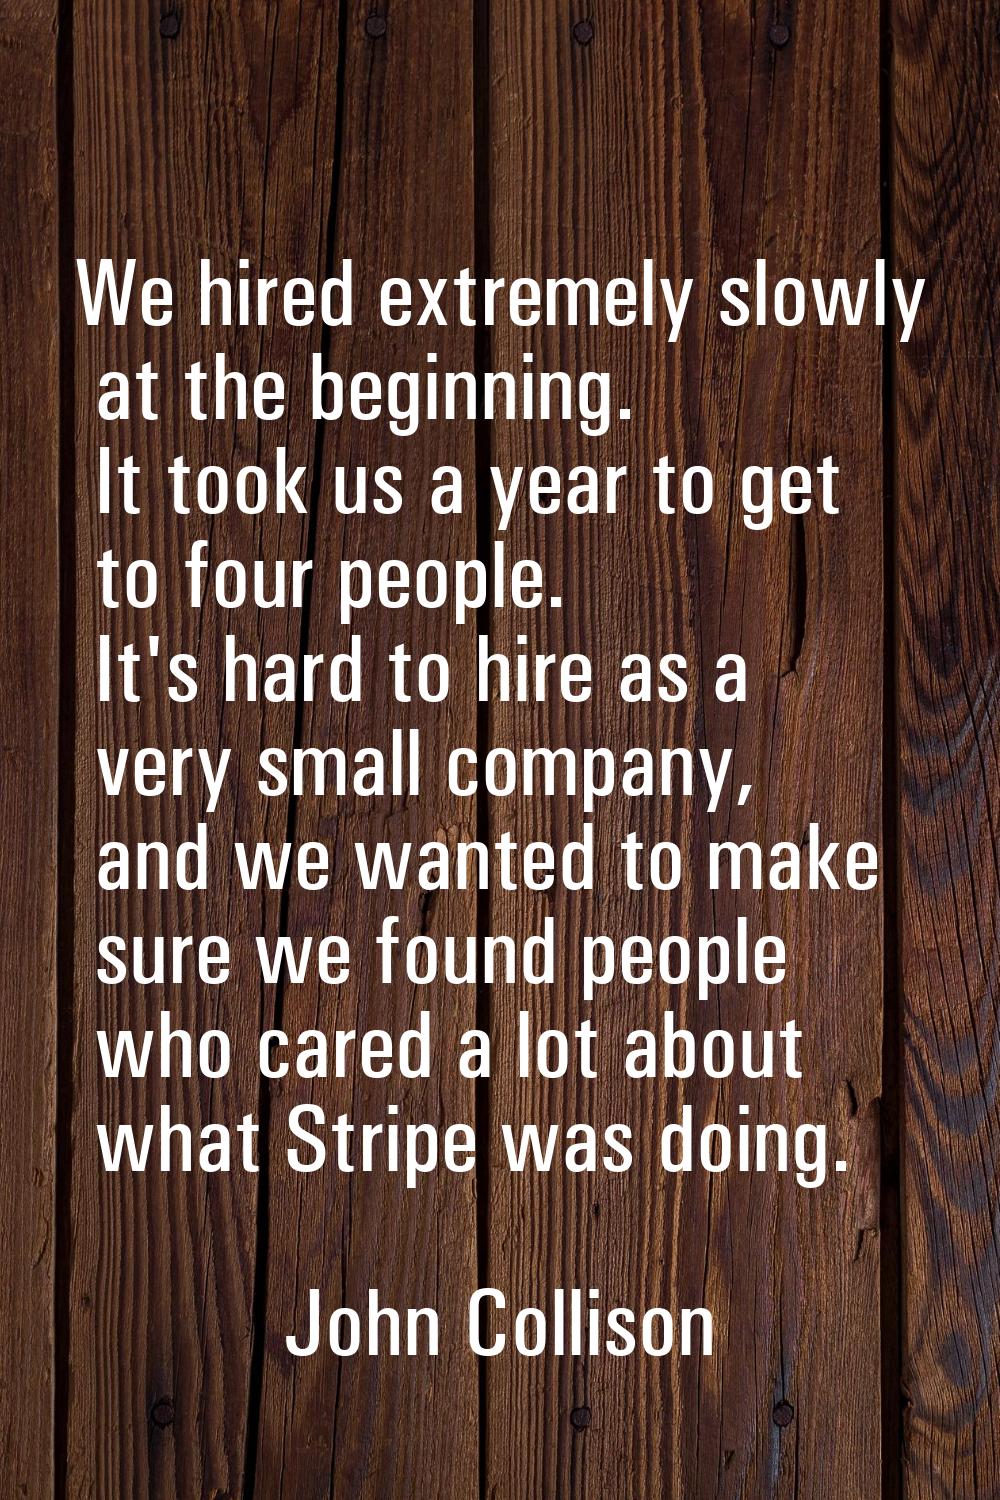 We hired extremely slowly at the beginning. It took us a year to get to four people. It's hard to h